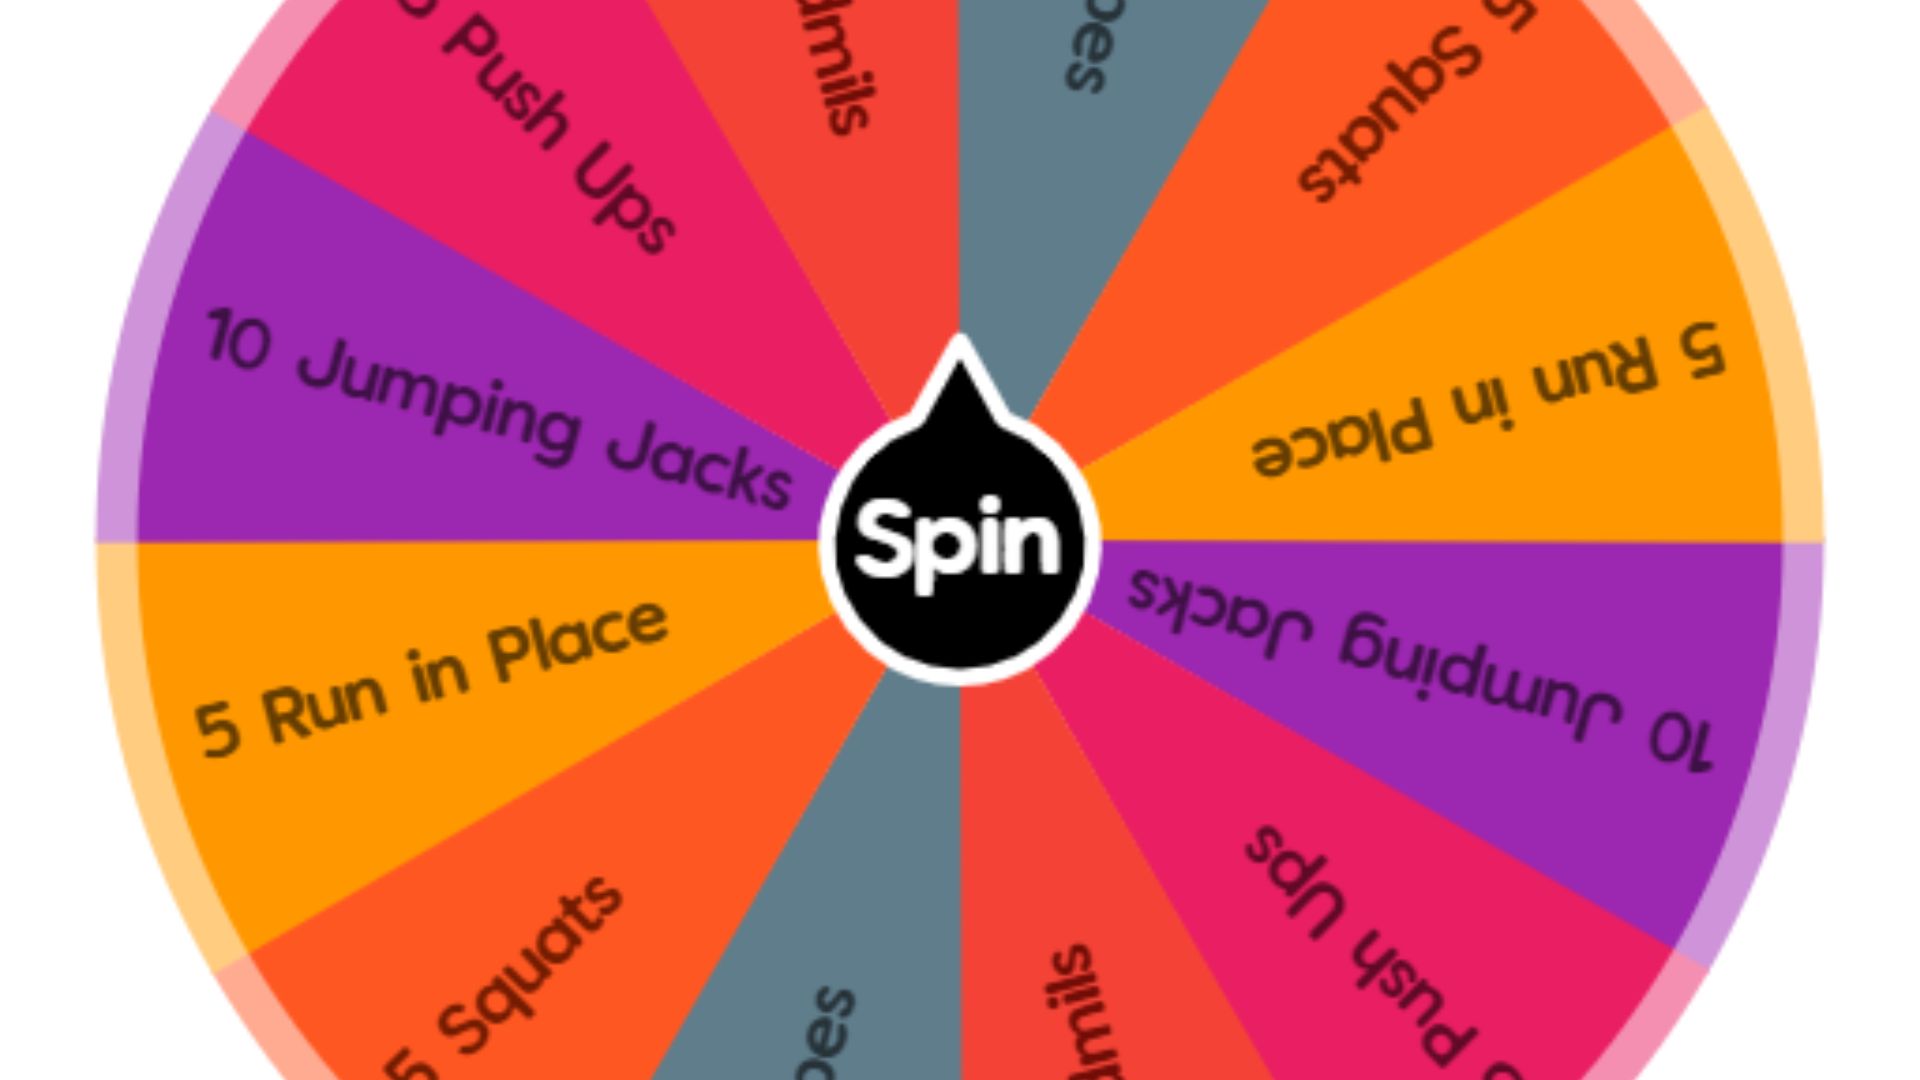 one of the spin wheels created for fitness routines